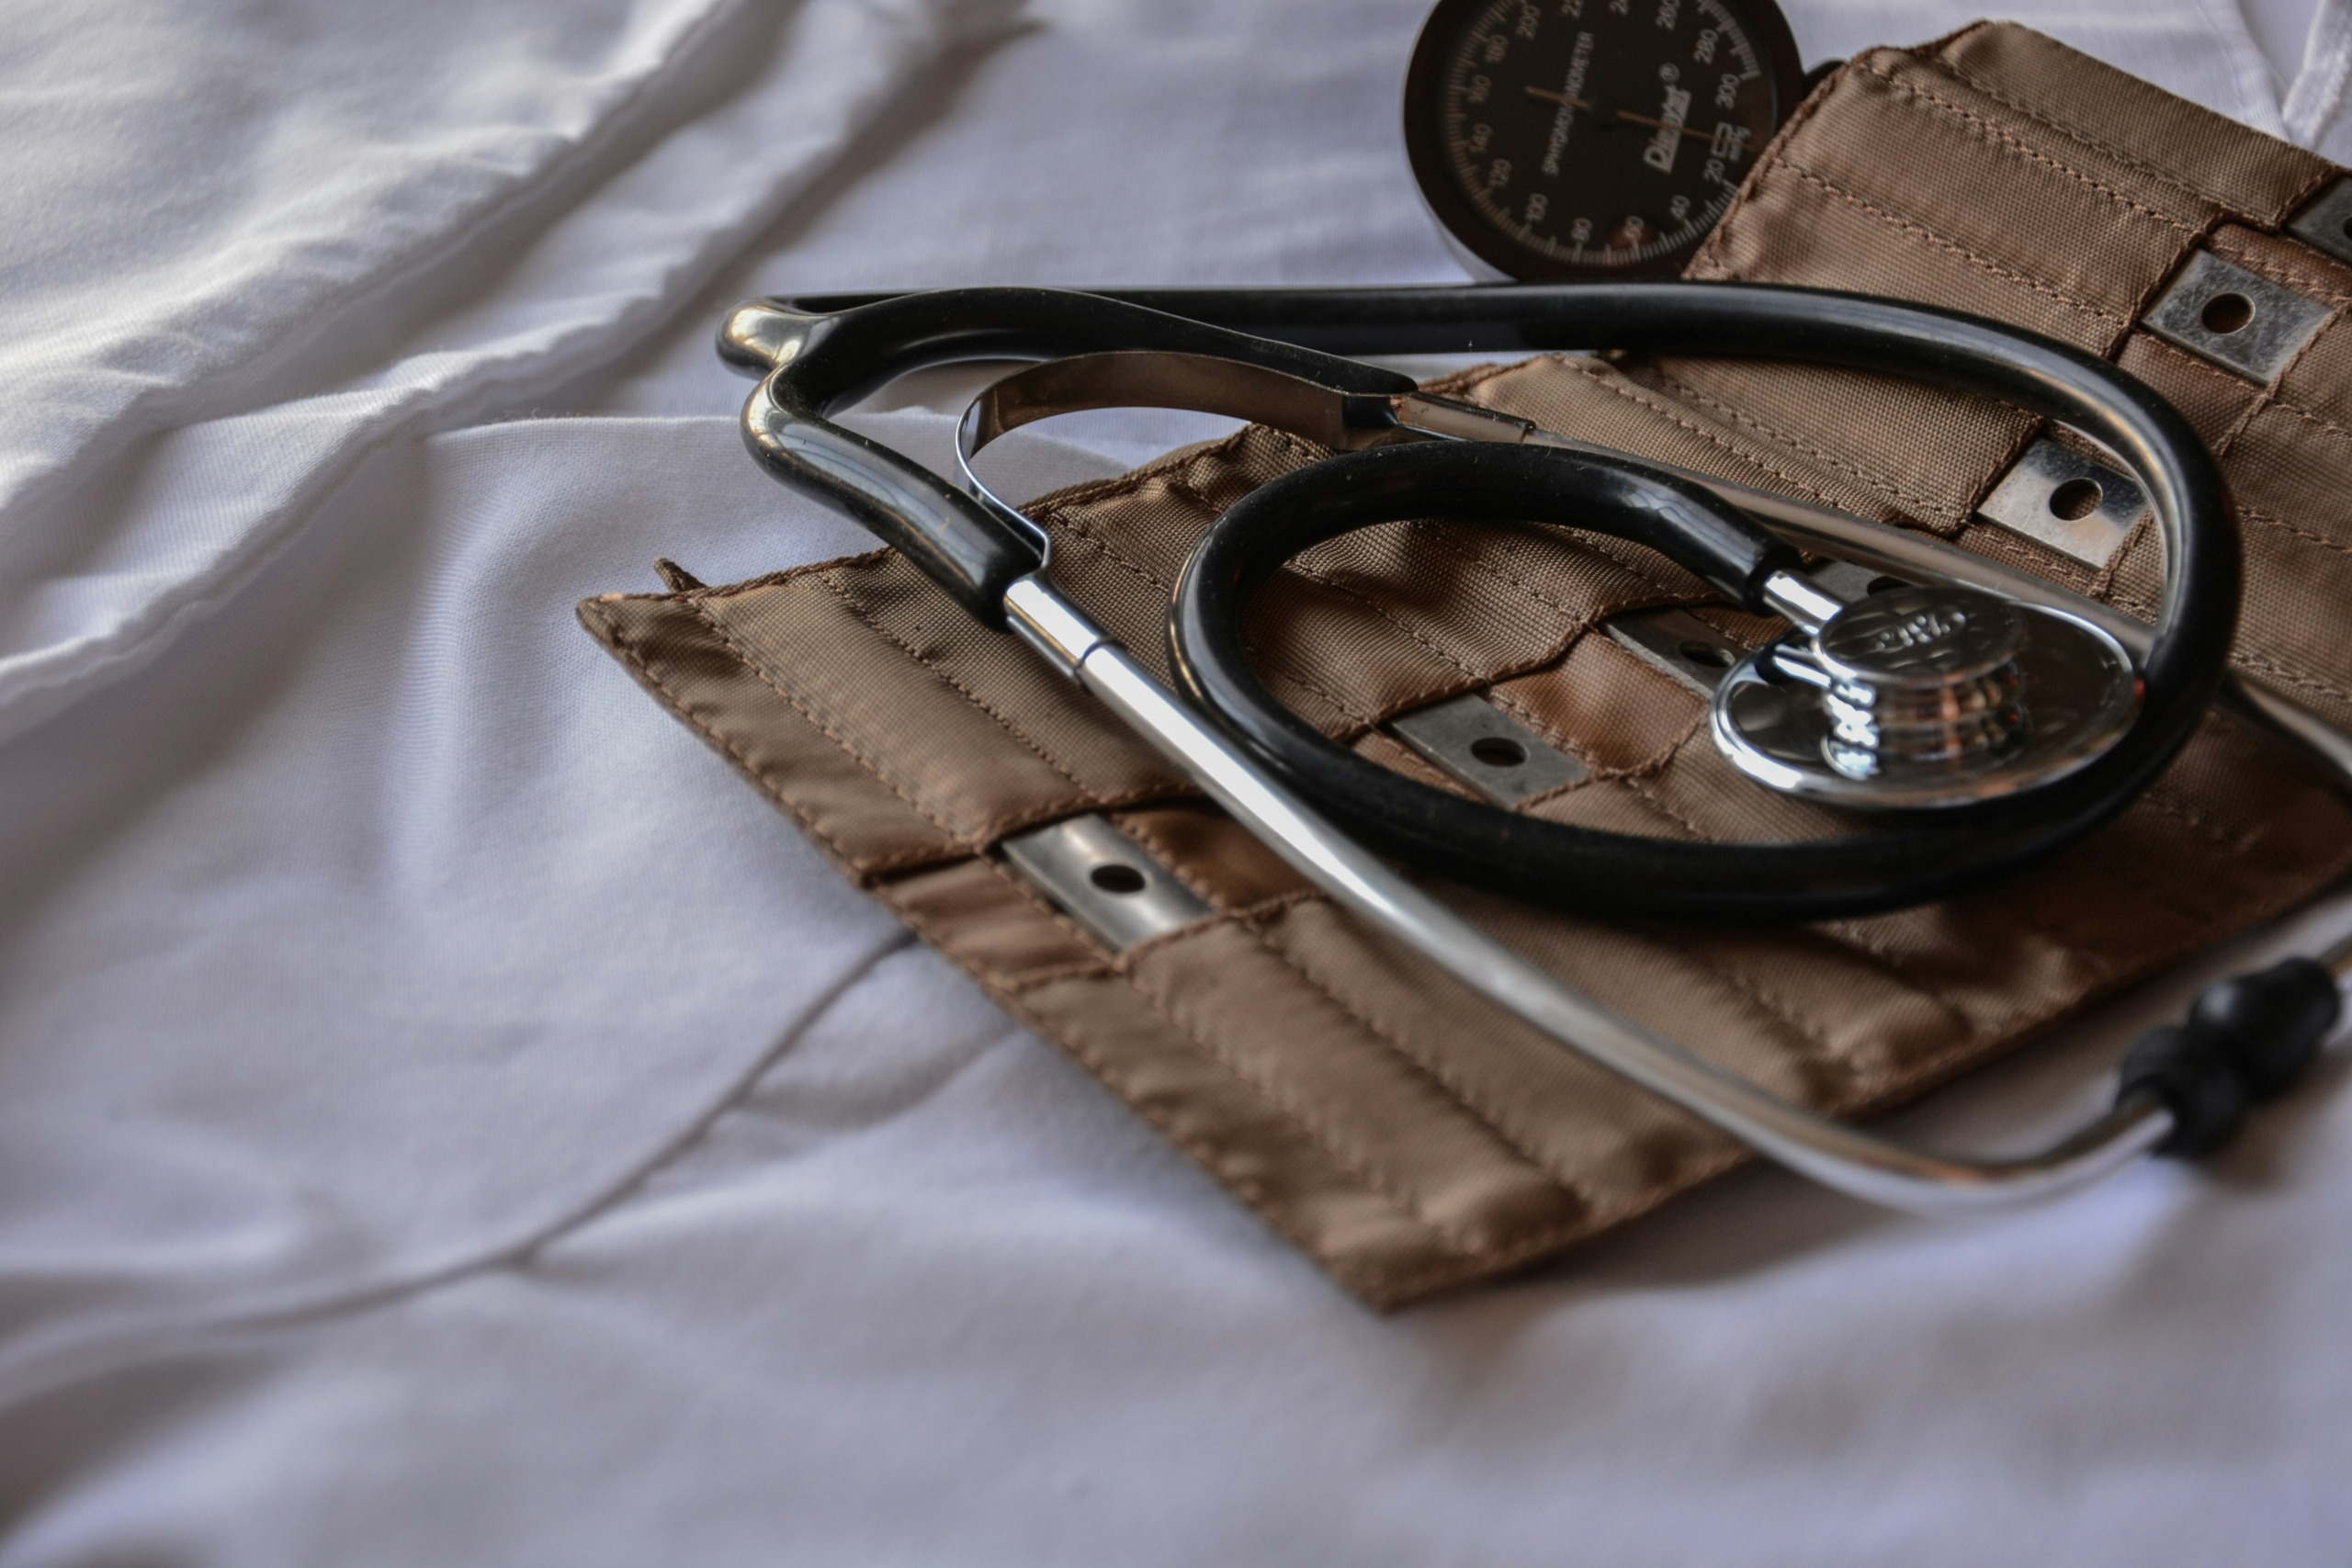 black stethoscope with brown leather case - photo by marcelo leal